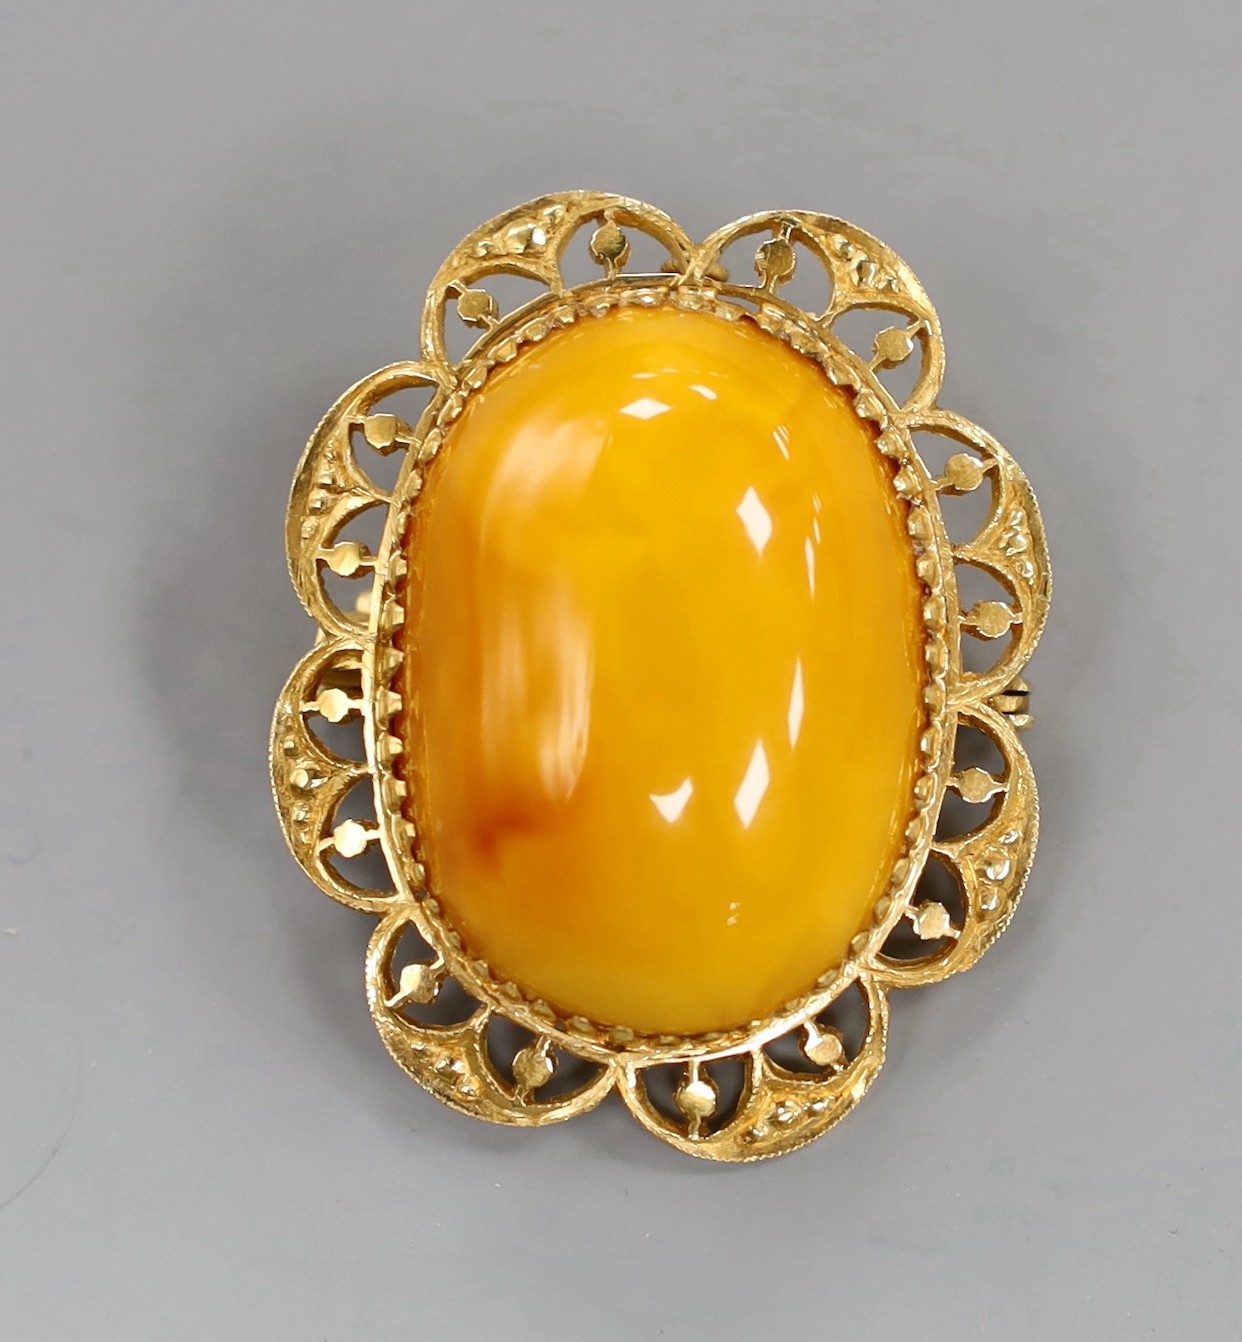 A 22ct mounted oval amber set brooch, 44mm, gross weight 12.1 grams.